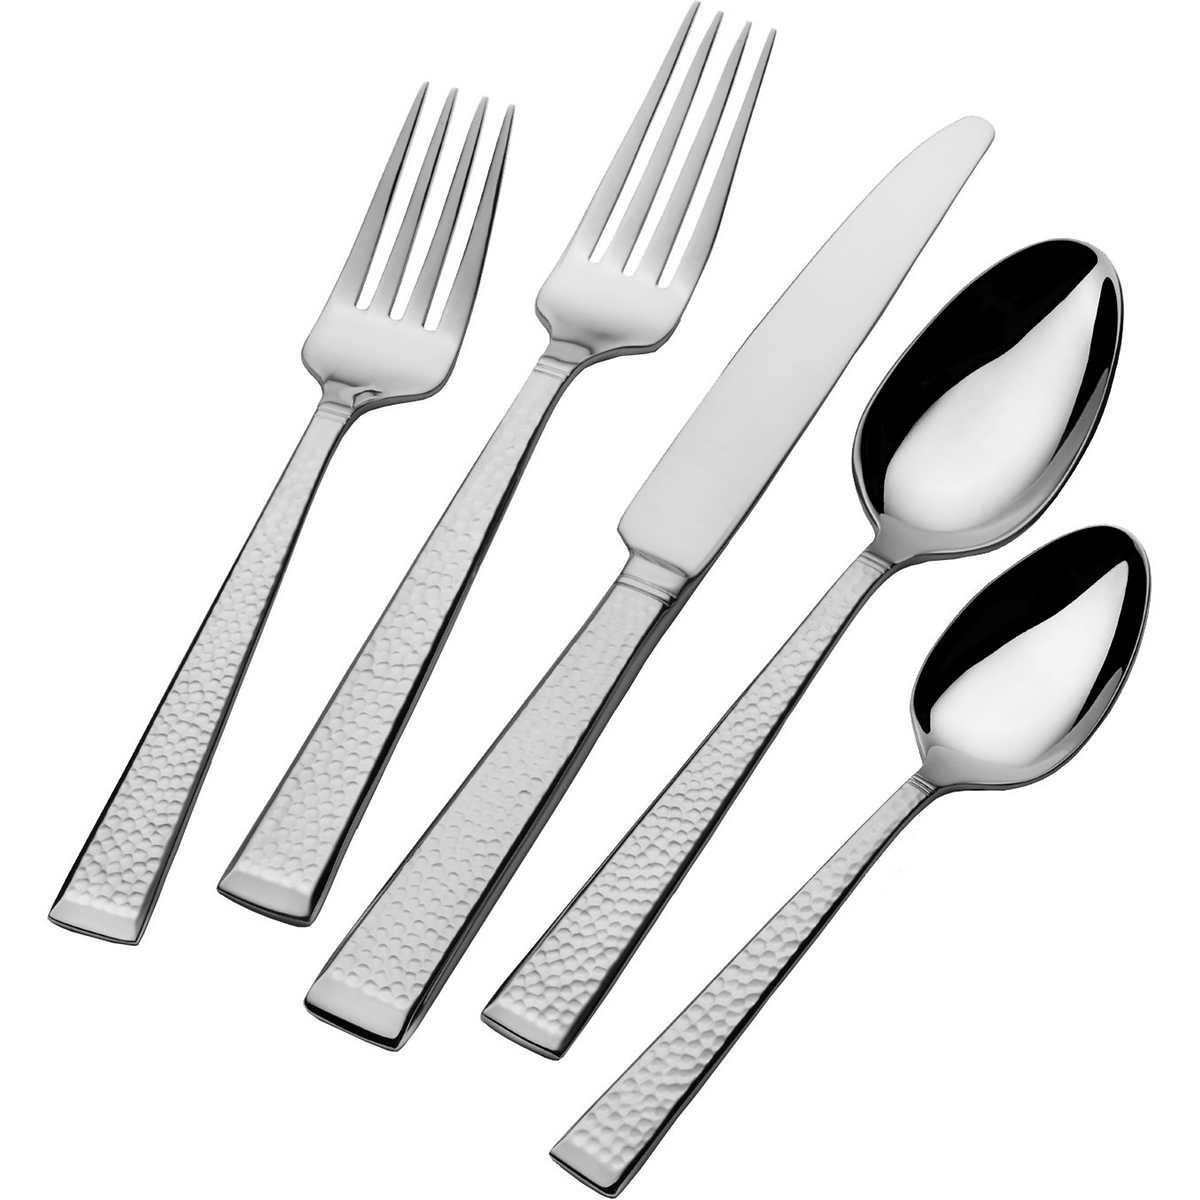 24 PC Fork and Knife Stainless Steel Set, KF18